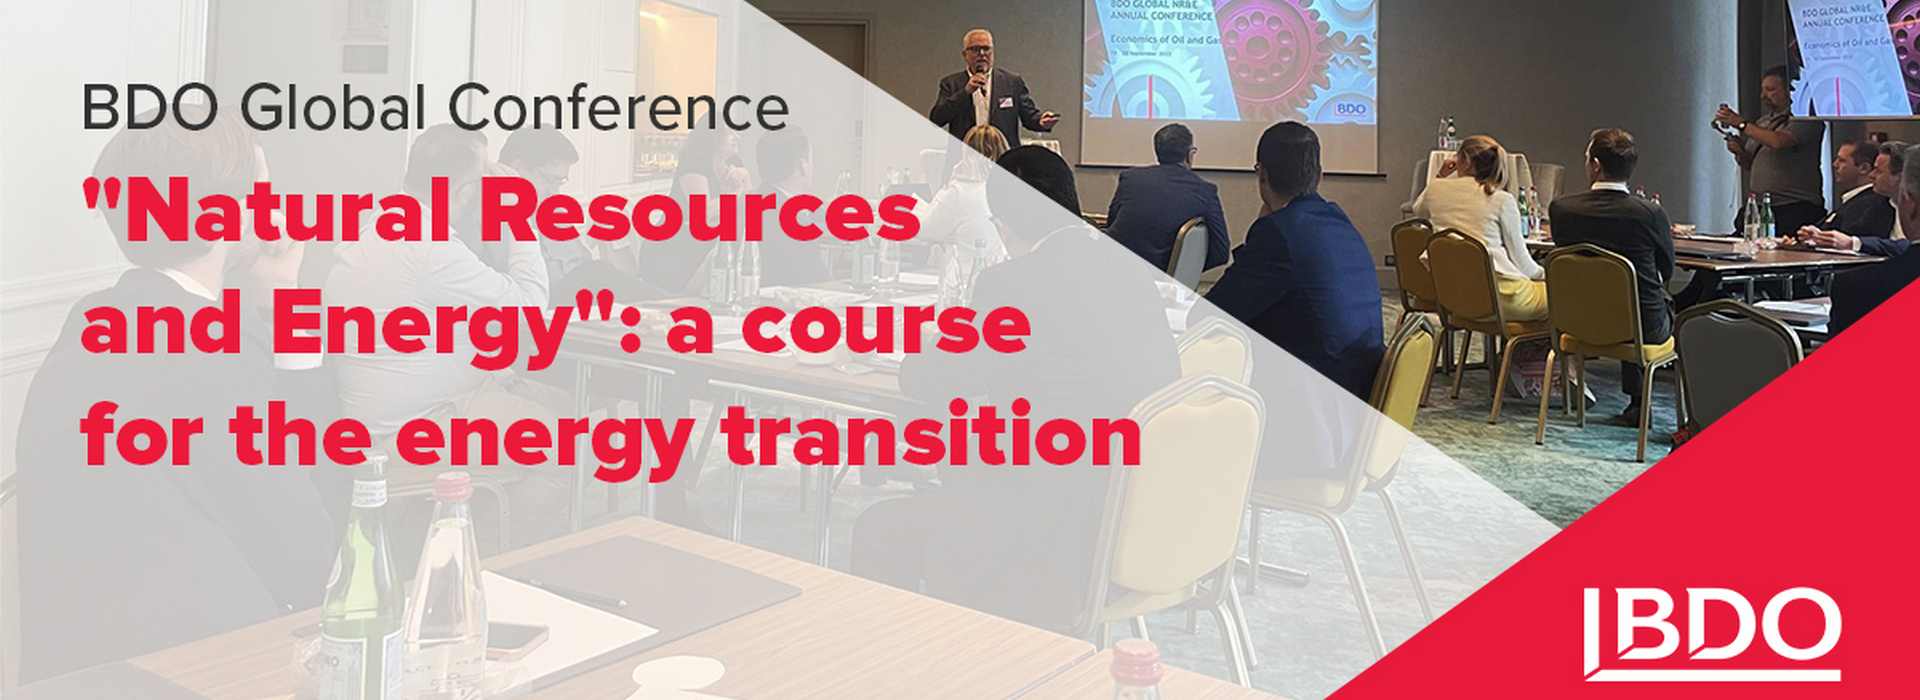 BDO Global Conference “Natural Resources and Energy”: a Course for the Energy Transition